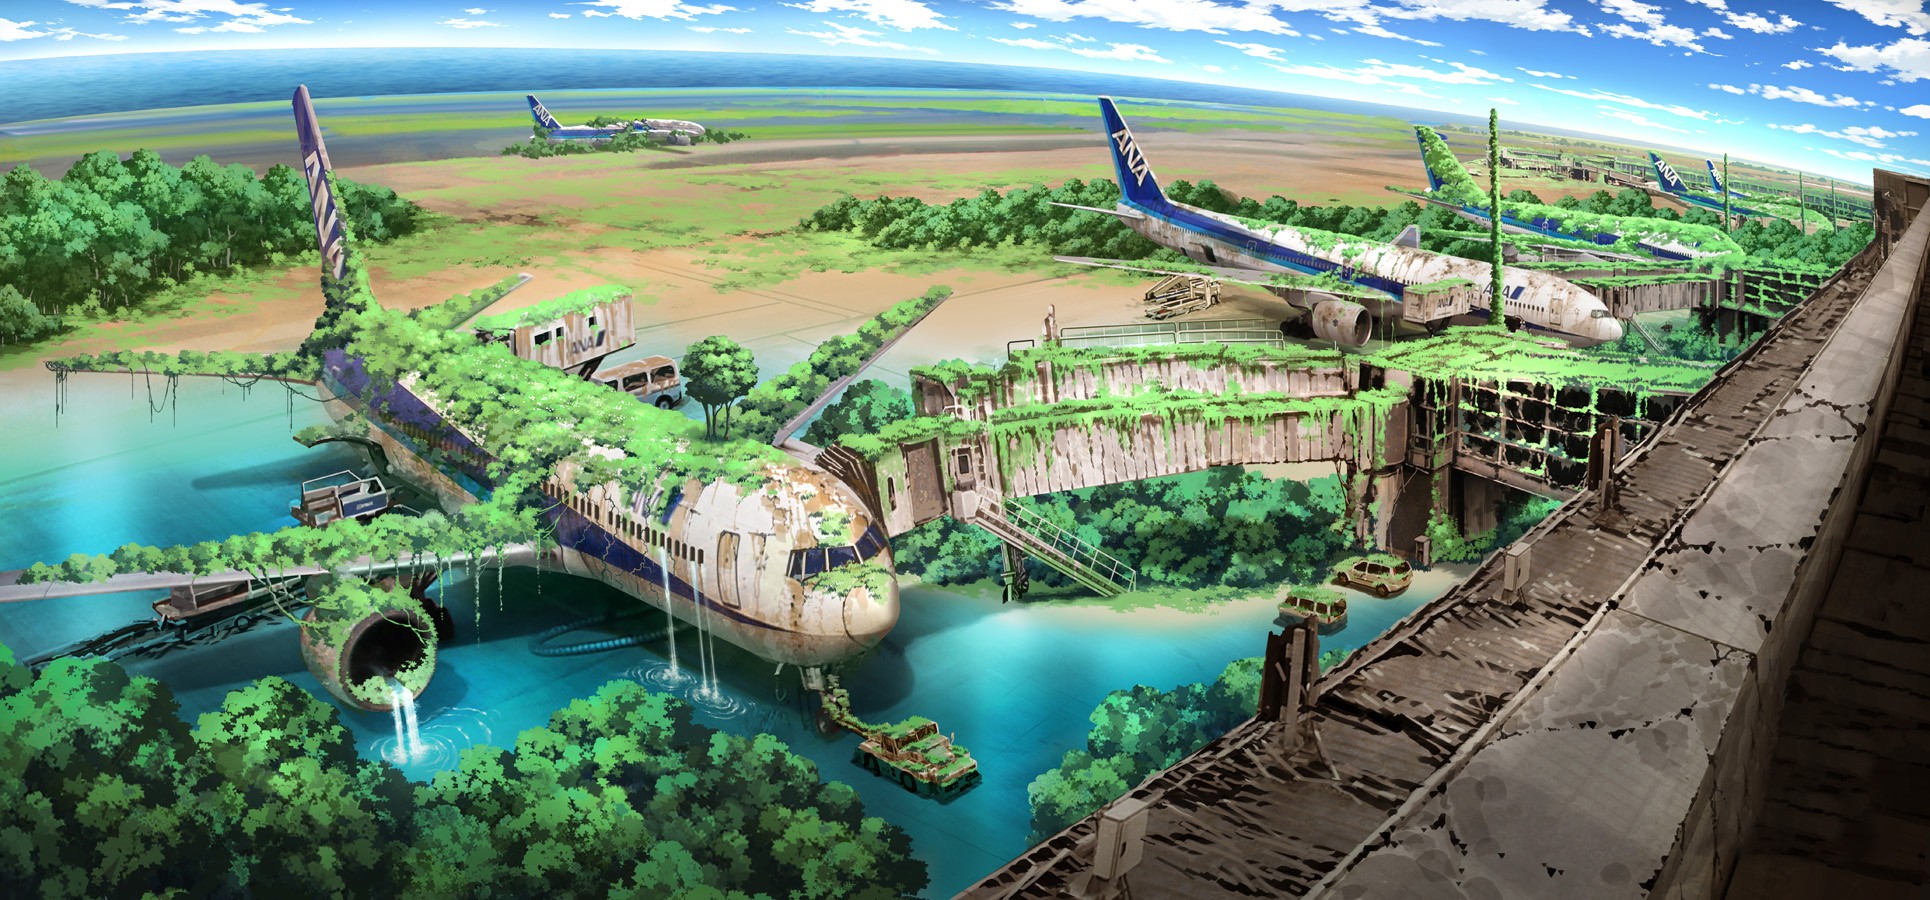 Anime 1930x900 anime landscape apocalyptic aircraft futuristic science fiction wreck vehicle airport artwork passenger aircraft abandoned ruins